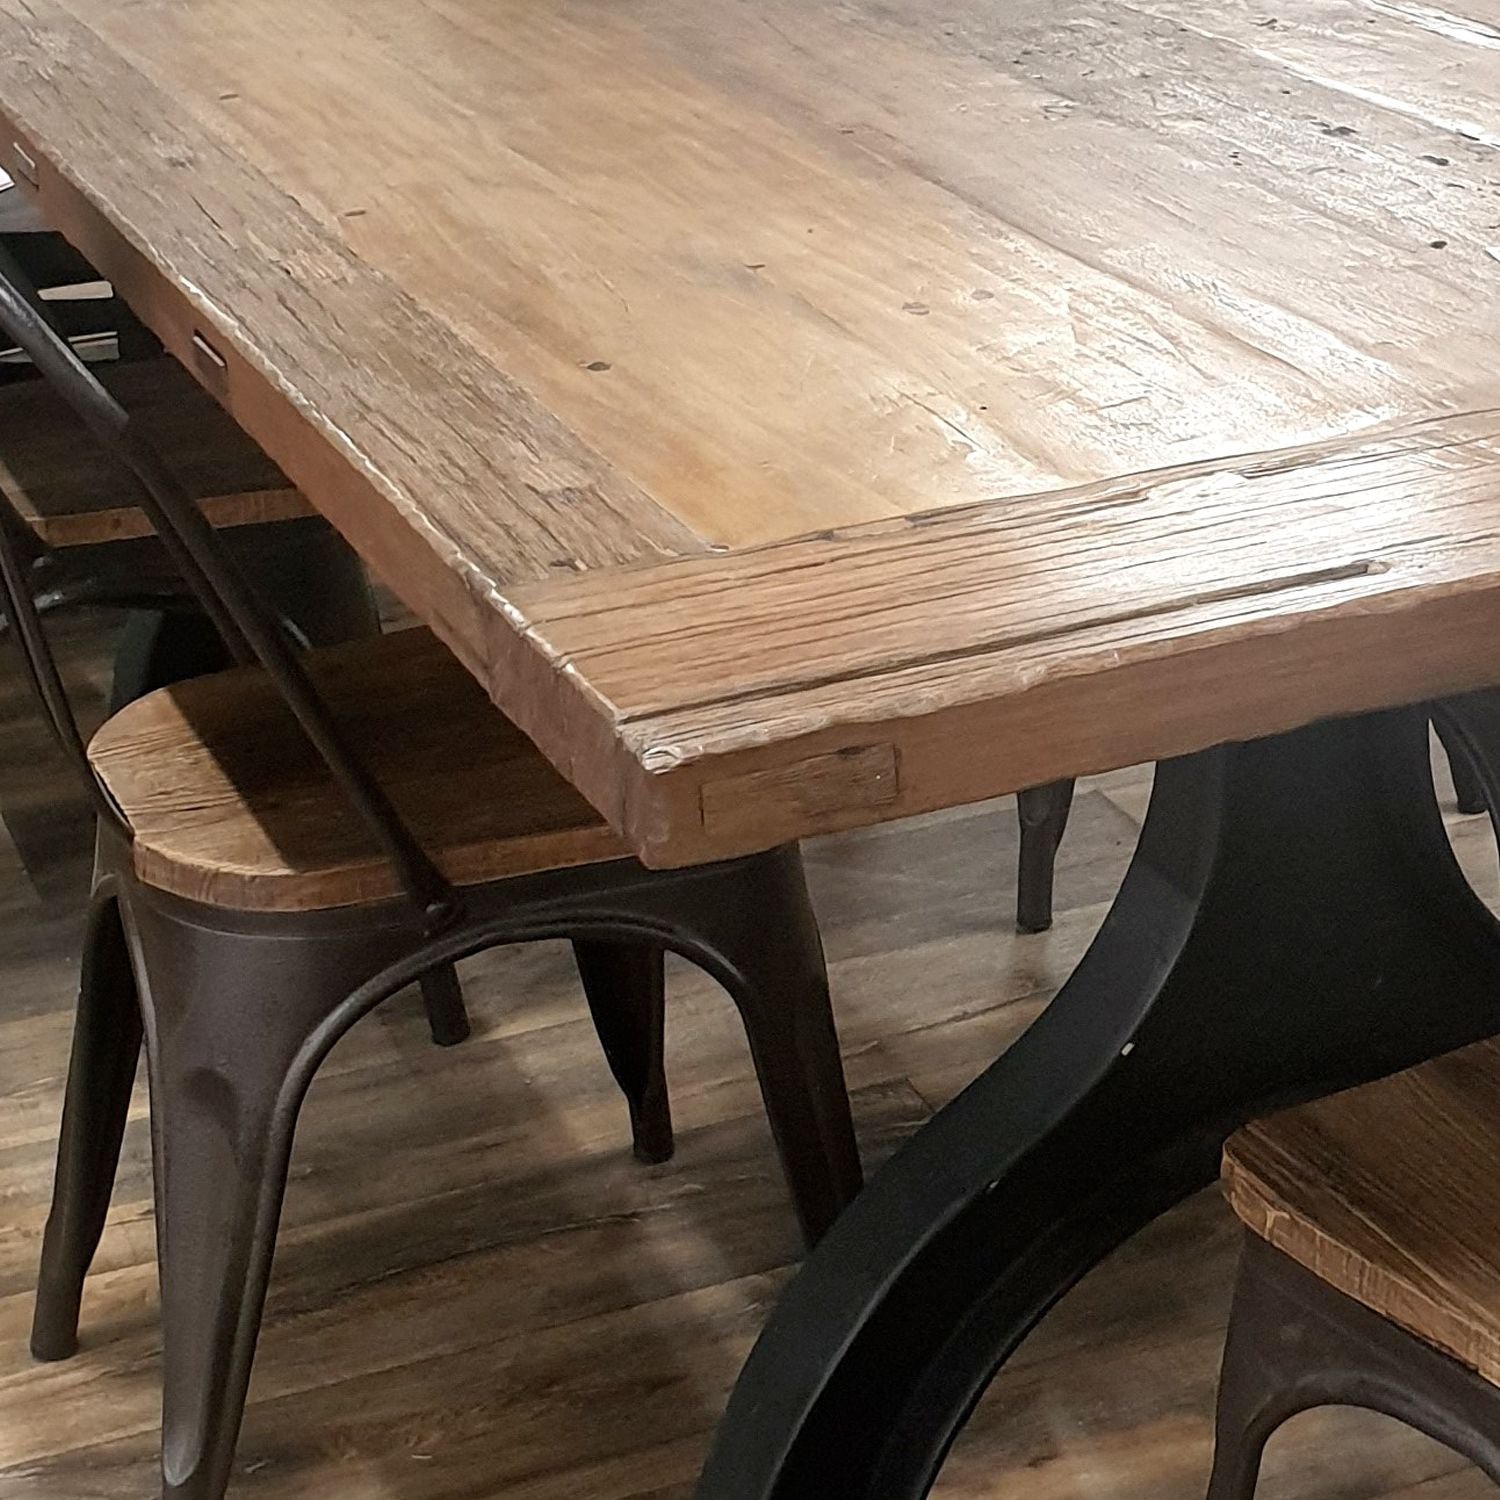 Boatwood Dining Table With Metal Legs